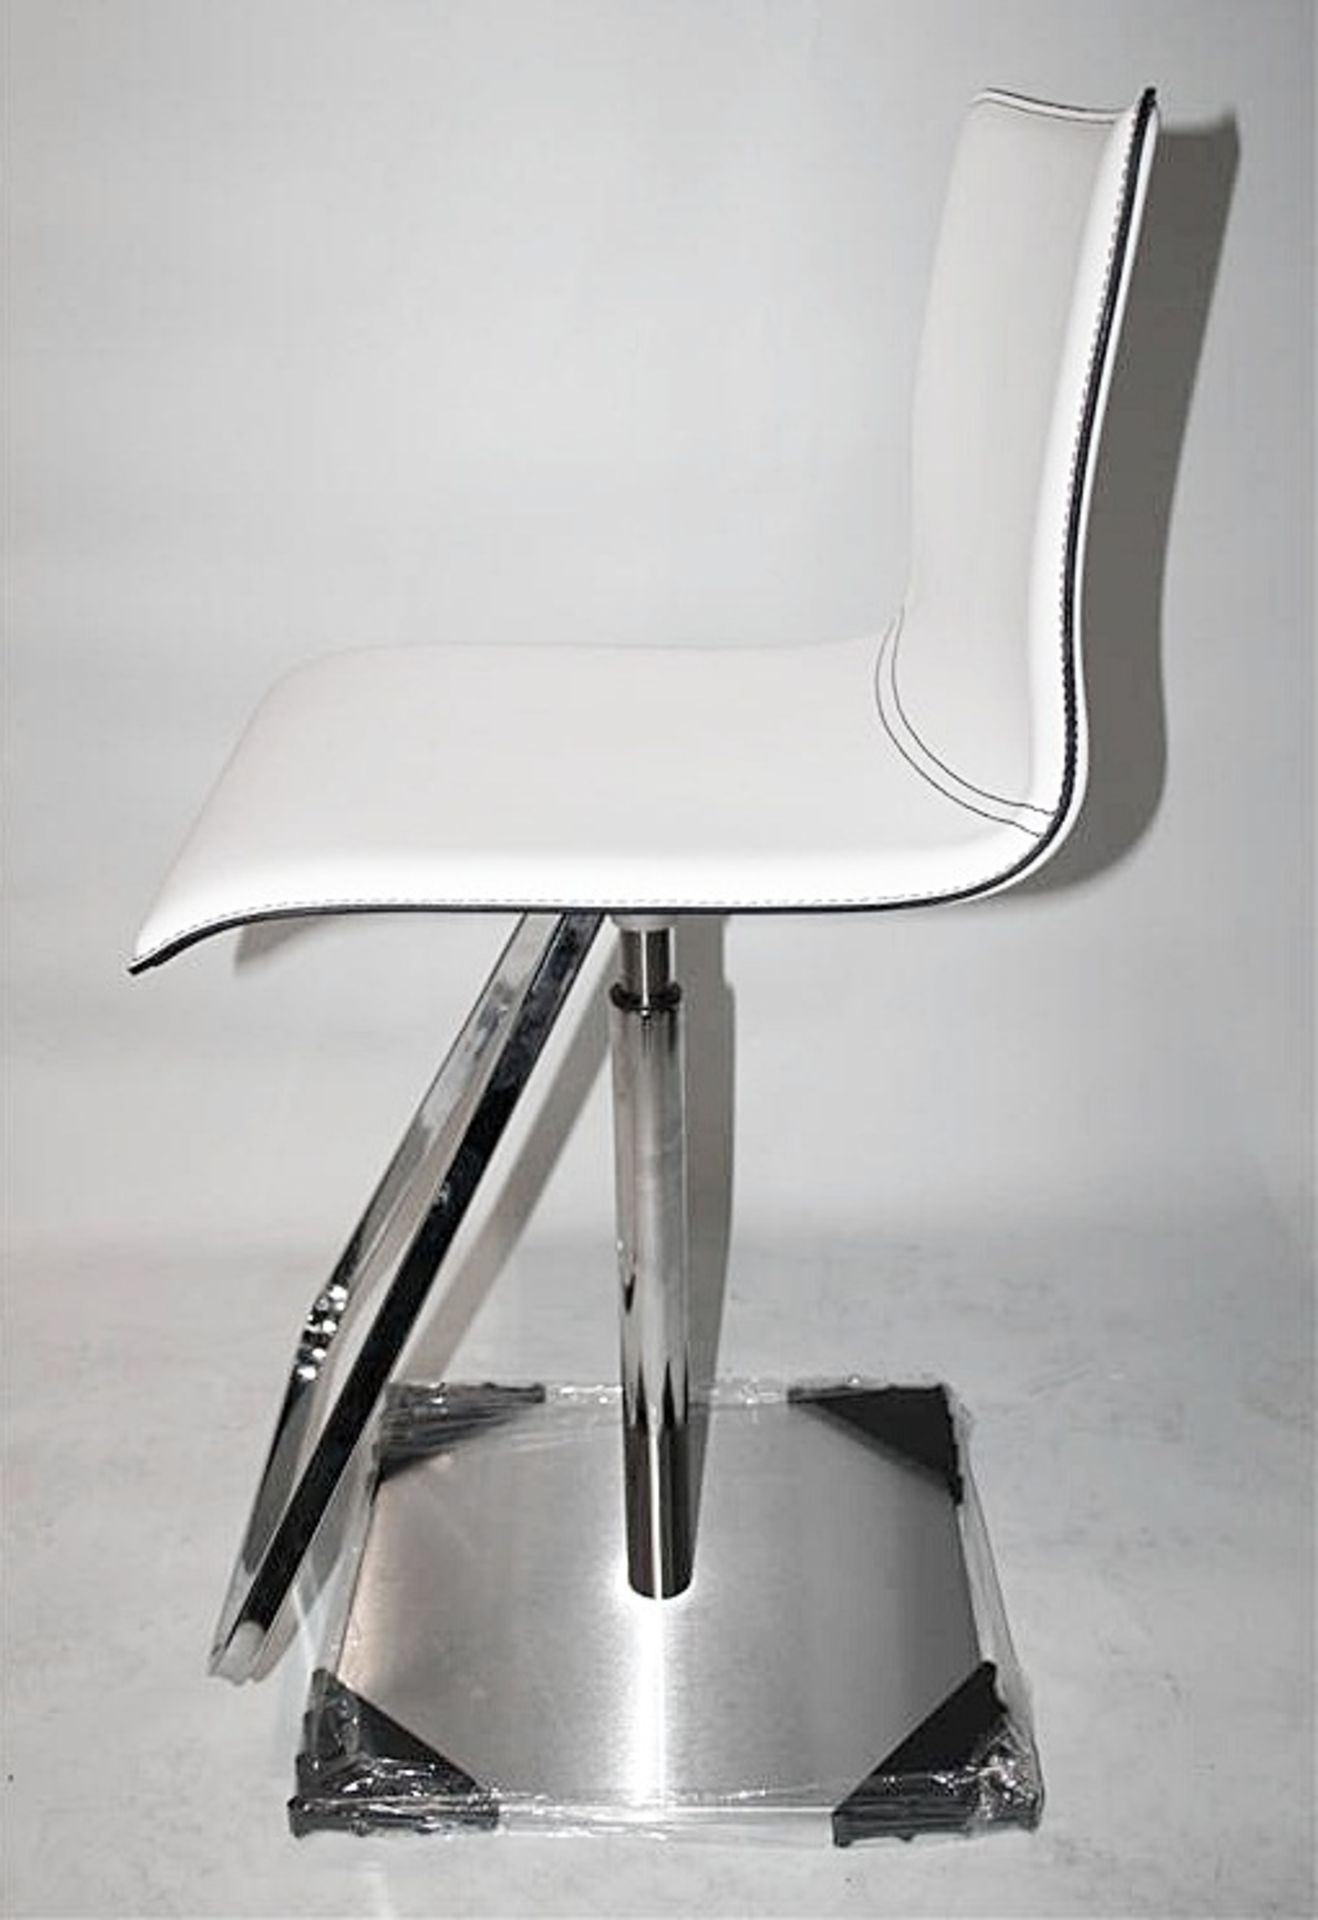 1 x CATTELAN "Toto" Stool - White With Black Stitching  - Made In Italy - Ref: 3352787 - CL087 - - Image 3 of 9